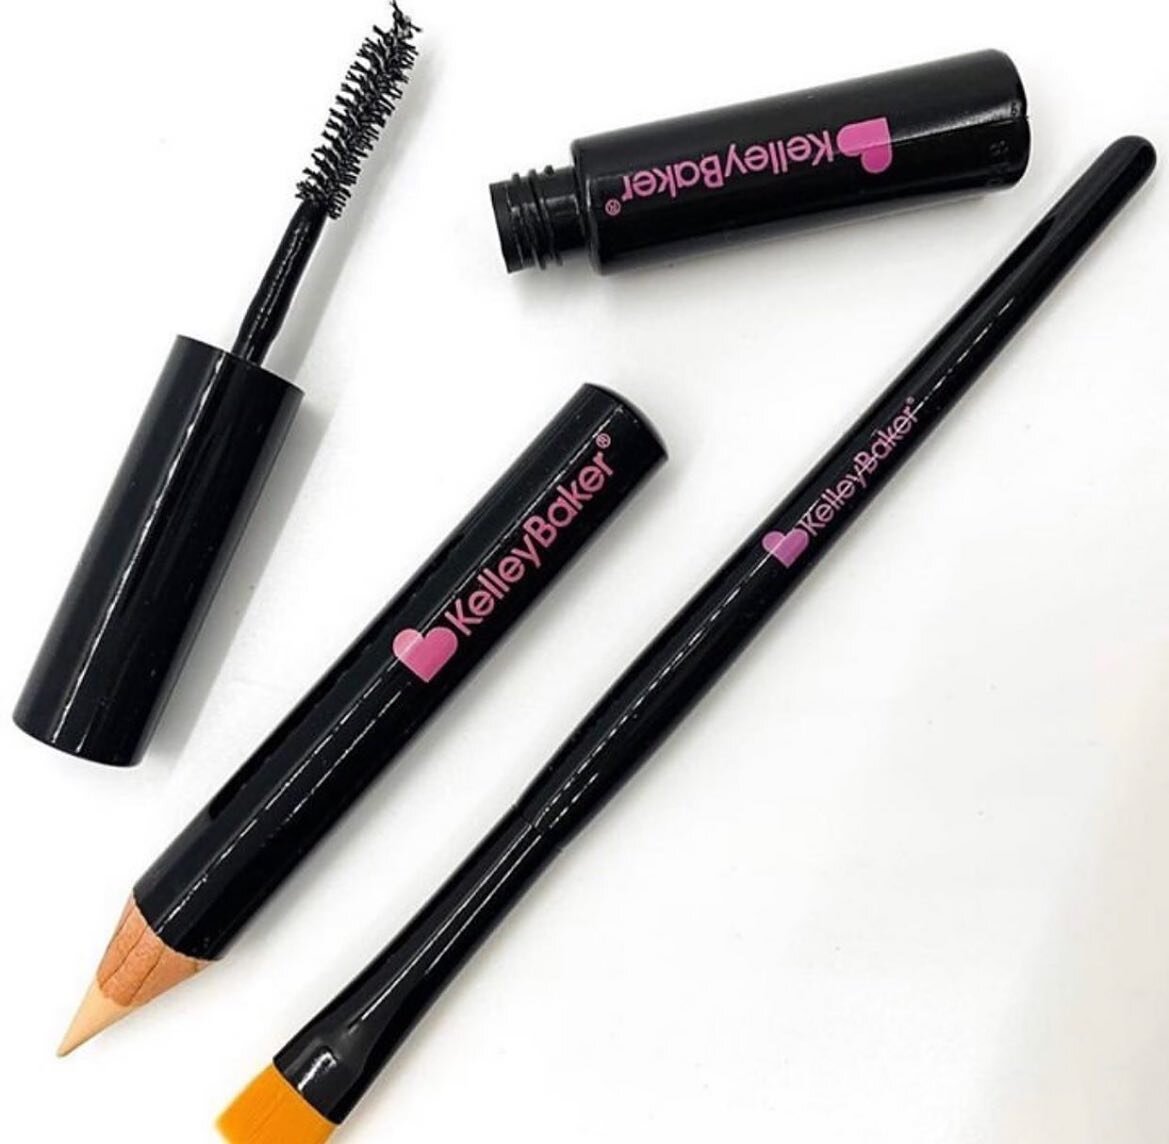 A few of our fave game changing brow products 🤩
.
.
.
Via: @kelleybakerpro